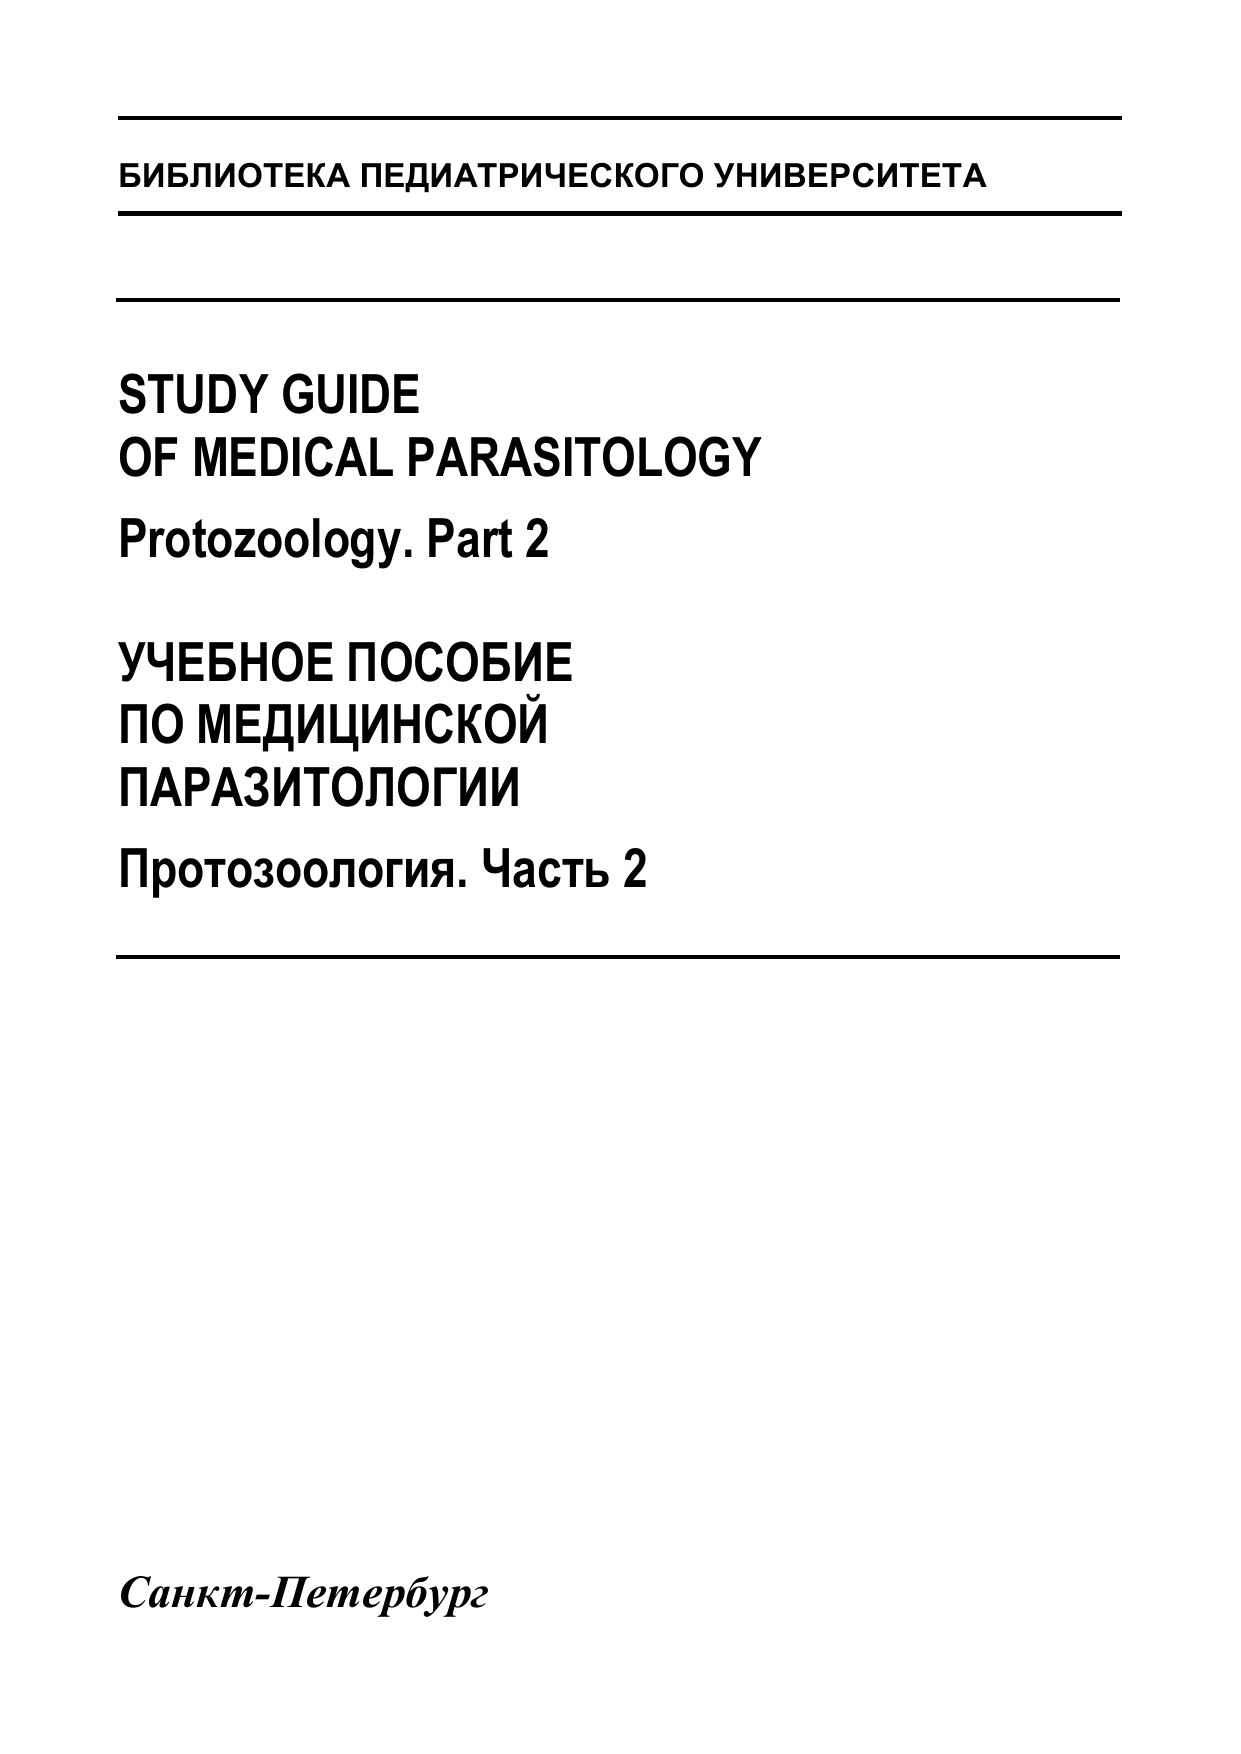 study guide of medical parasitology (2022)